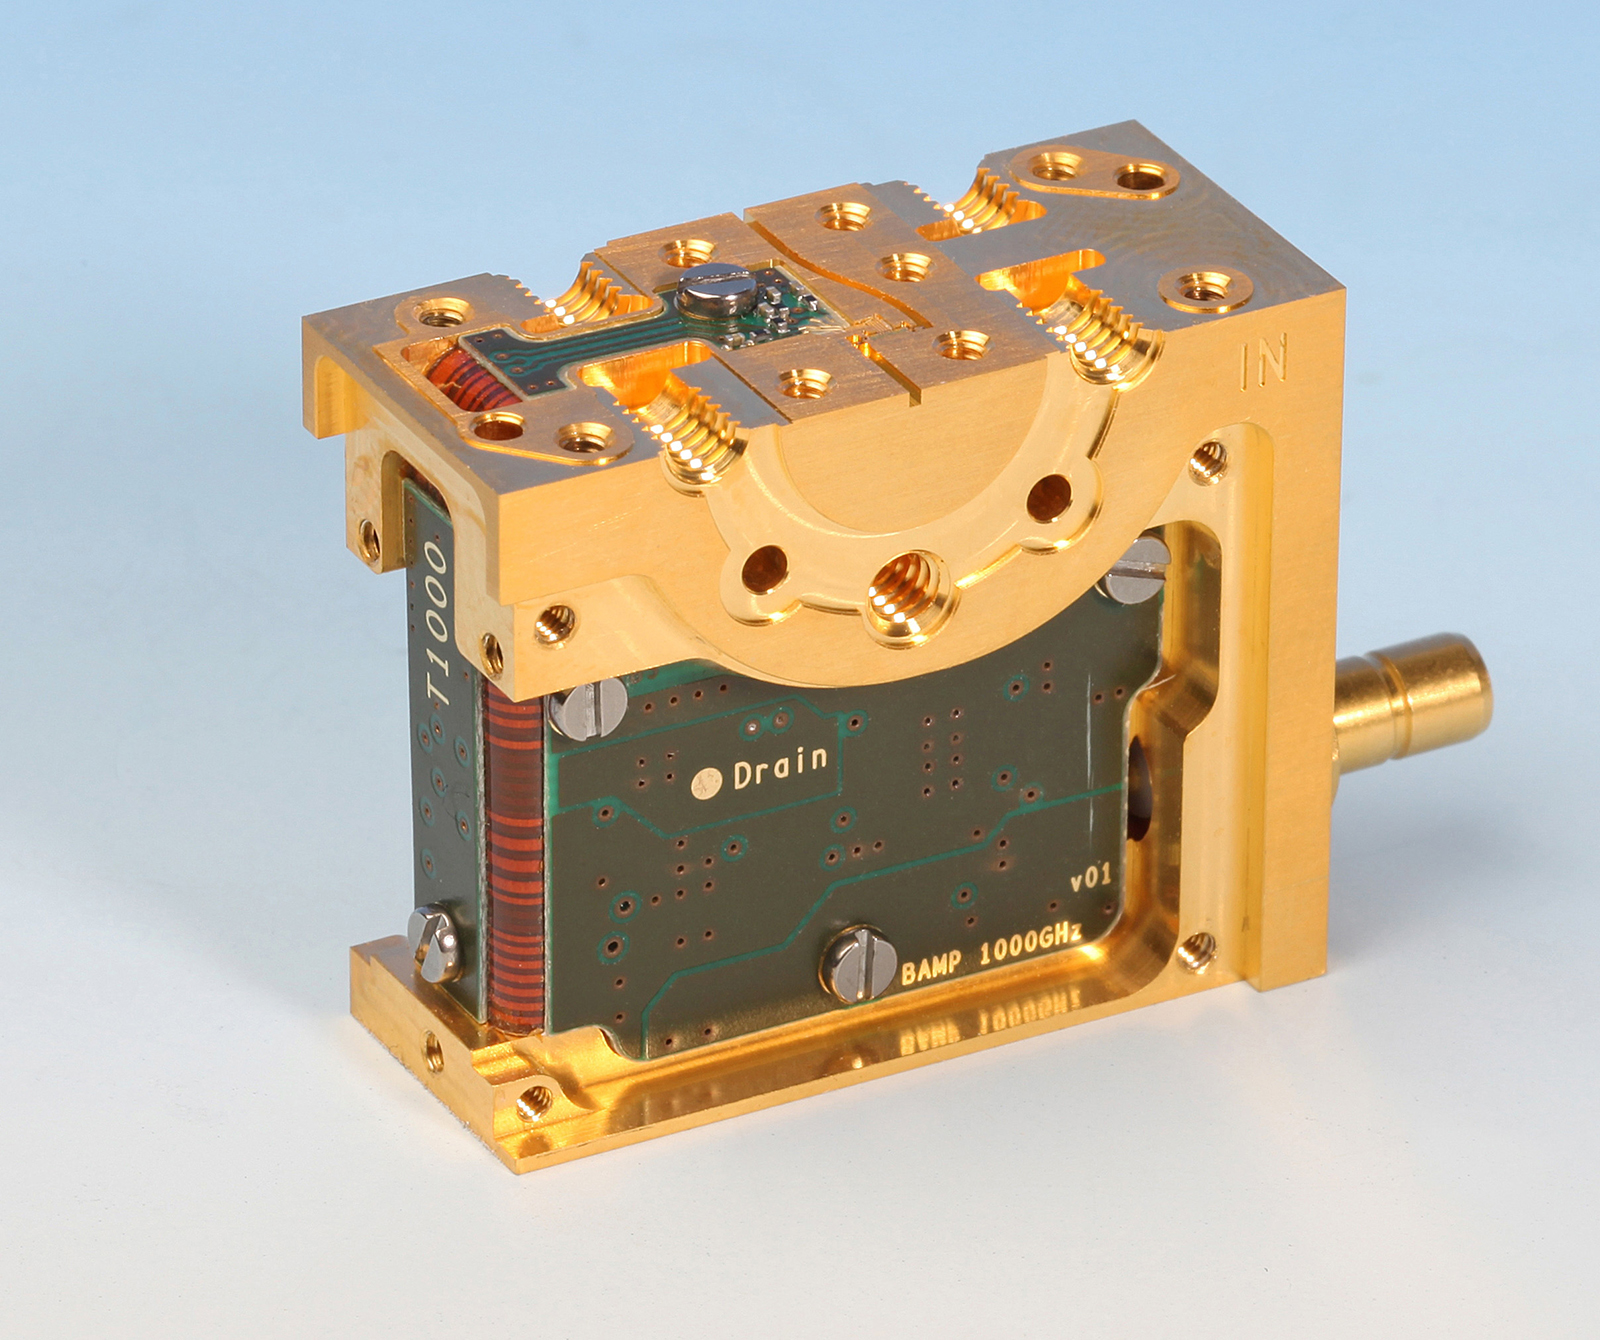 Amplifier module: The low-noise, high-sensitivity microwave amplifiers of the Fraunhofer IAF can already detect signals of only a few nanowatts. They are based on the semiconductor material indium-gallium-arsenide. 